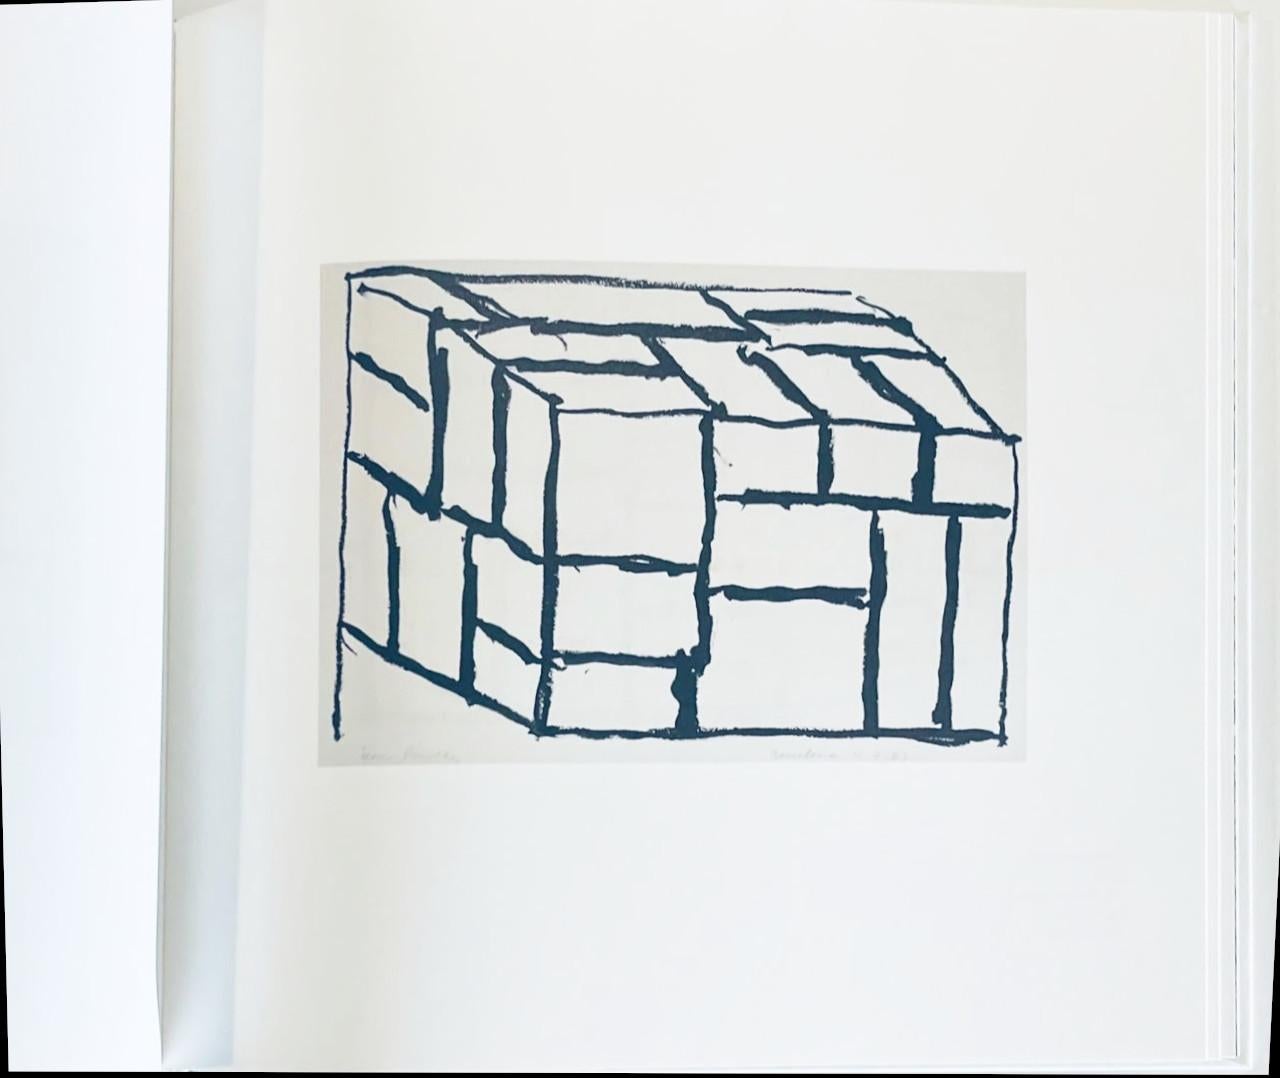 Different Places, Hardback monograph (Hand signed and inscribed by Sean Scully) For Sale 13